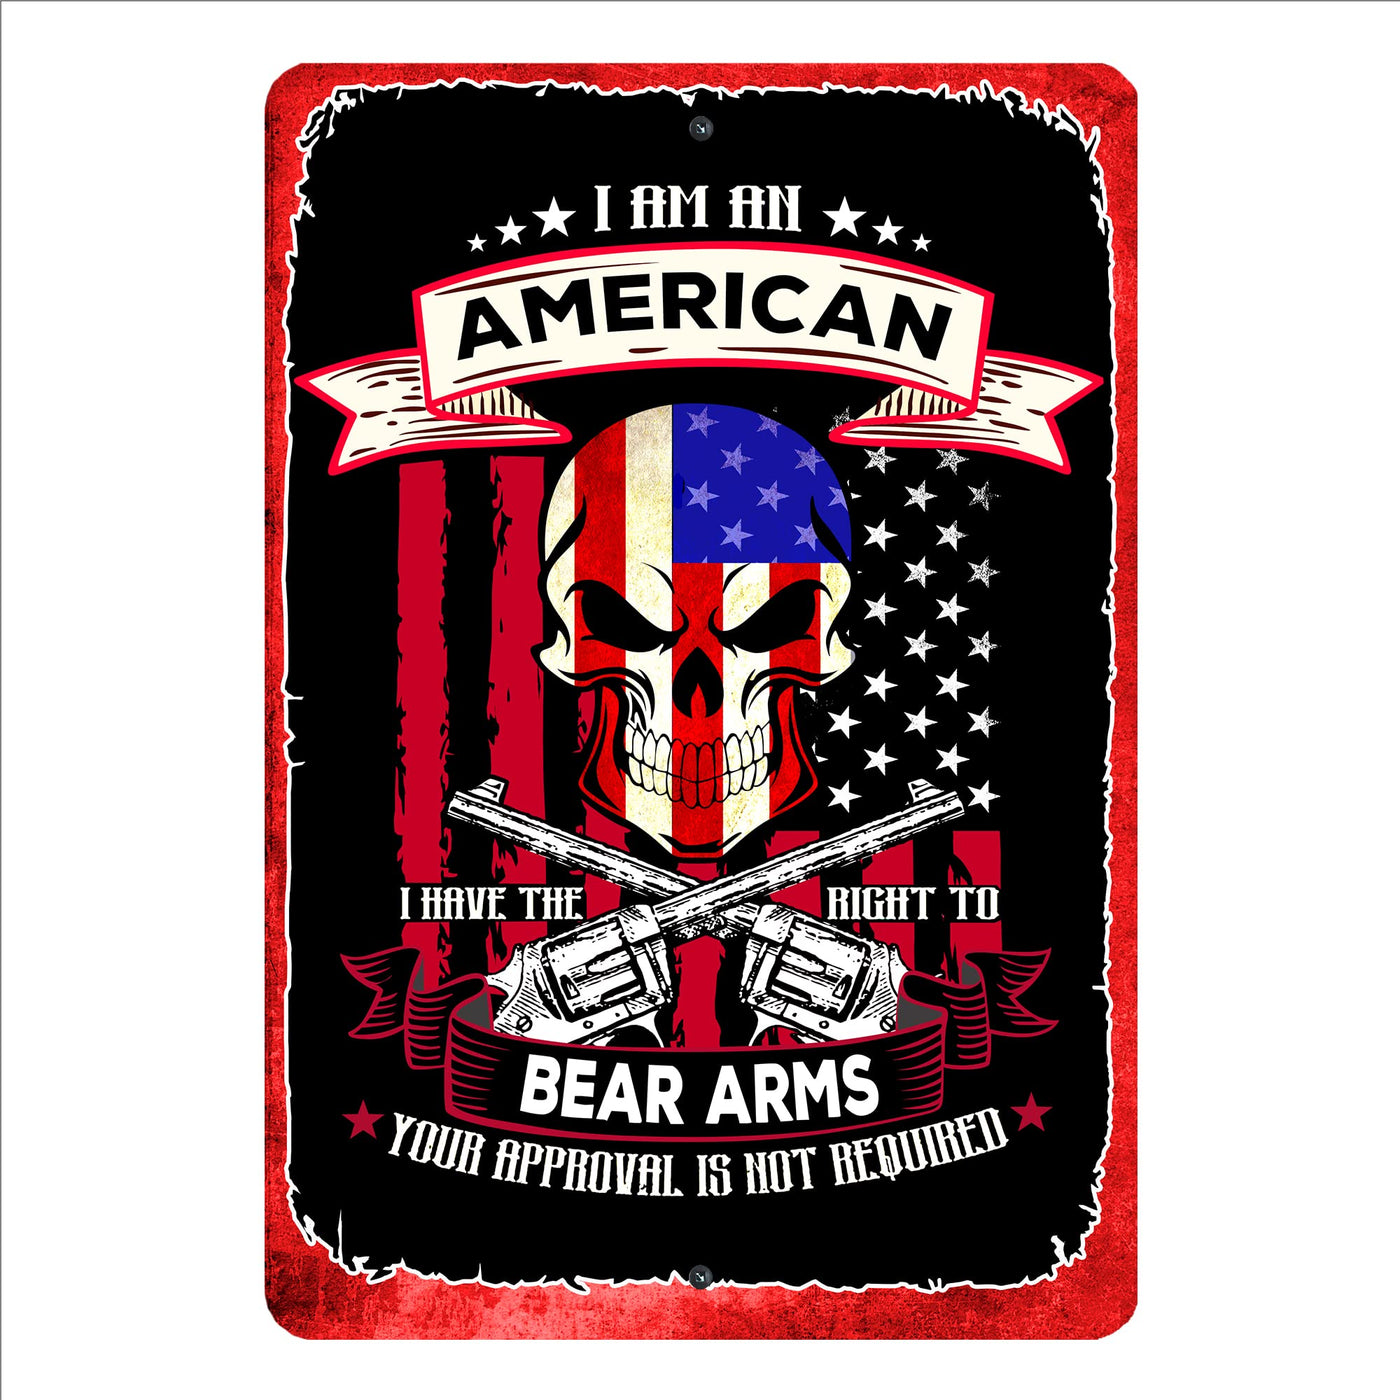 I Am An American -Right to Bear Arms Metal Signs American Flag Wall Art -12x 8" Vintage Patriotic Tin Sign for Home, Man Cave, Garage, Shop, Military Decor. Rustic USA Accessories -Veterans Gifts!